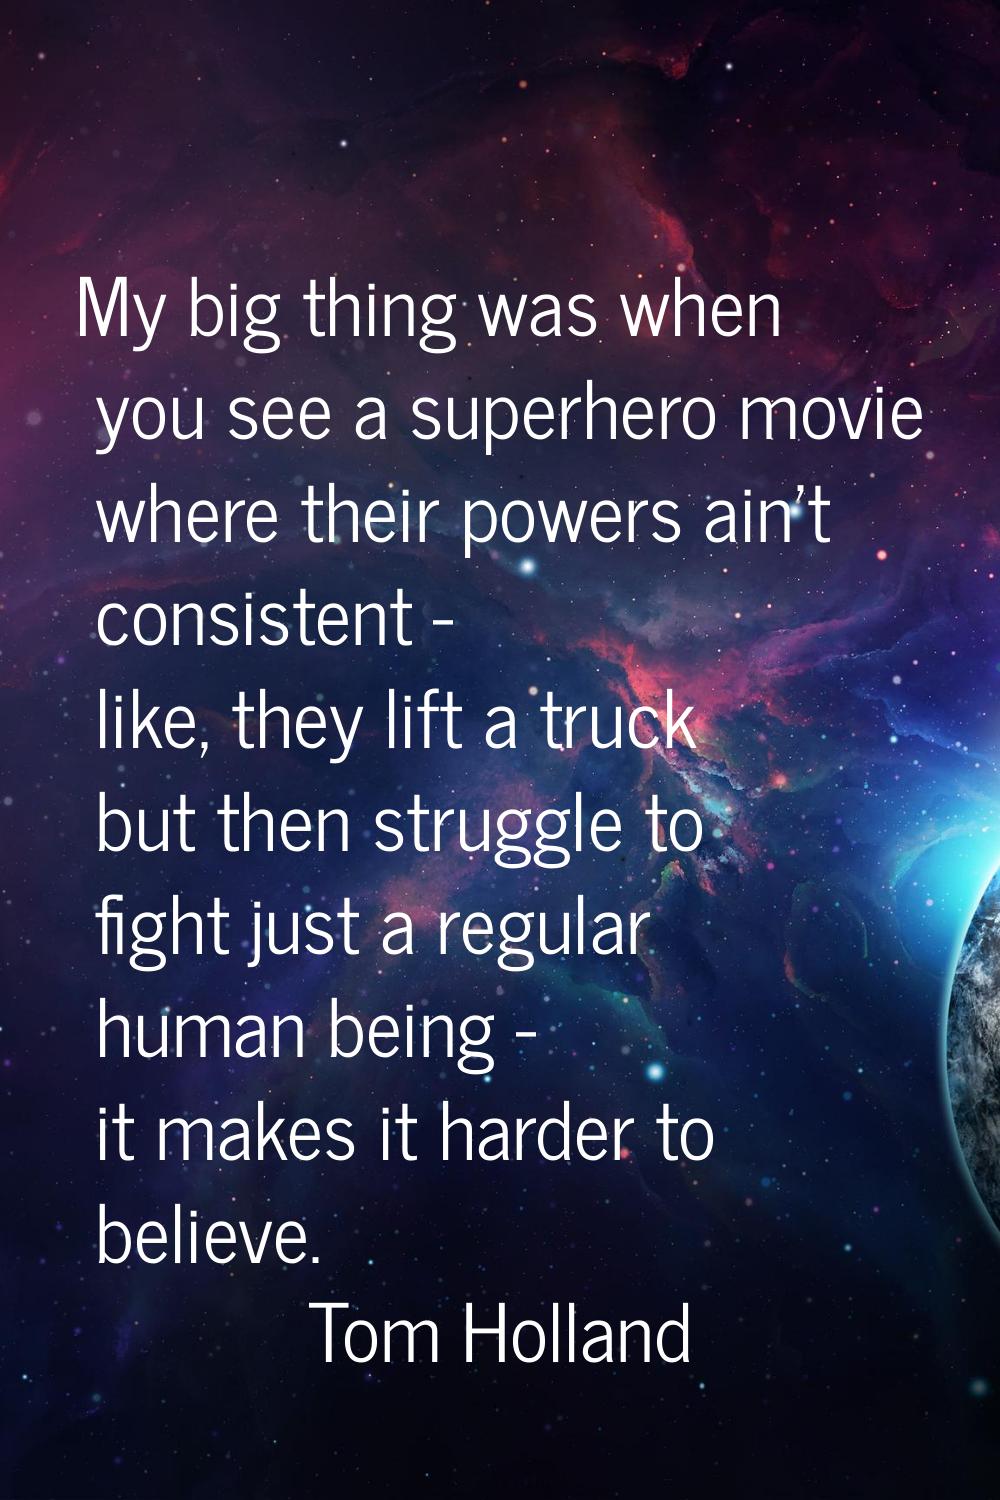 My big thing was when you see a superhero movie where their powers ain't consistent - like, they li